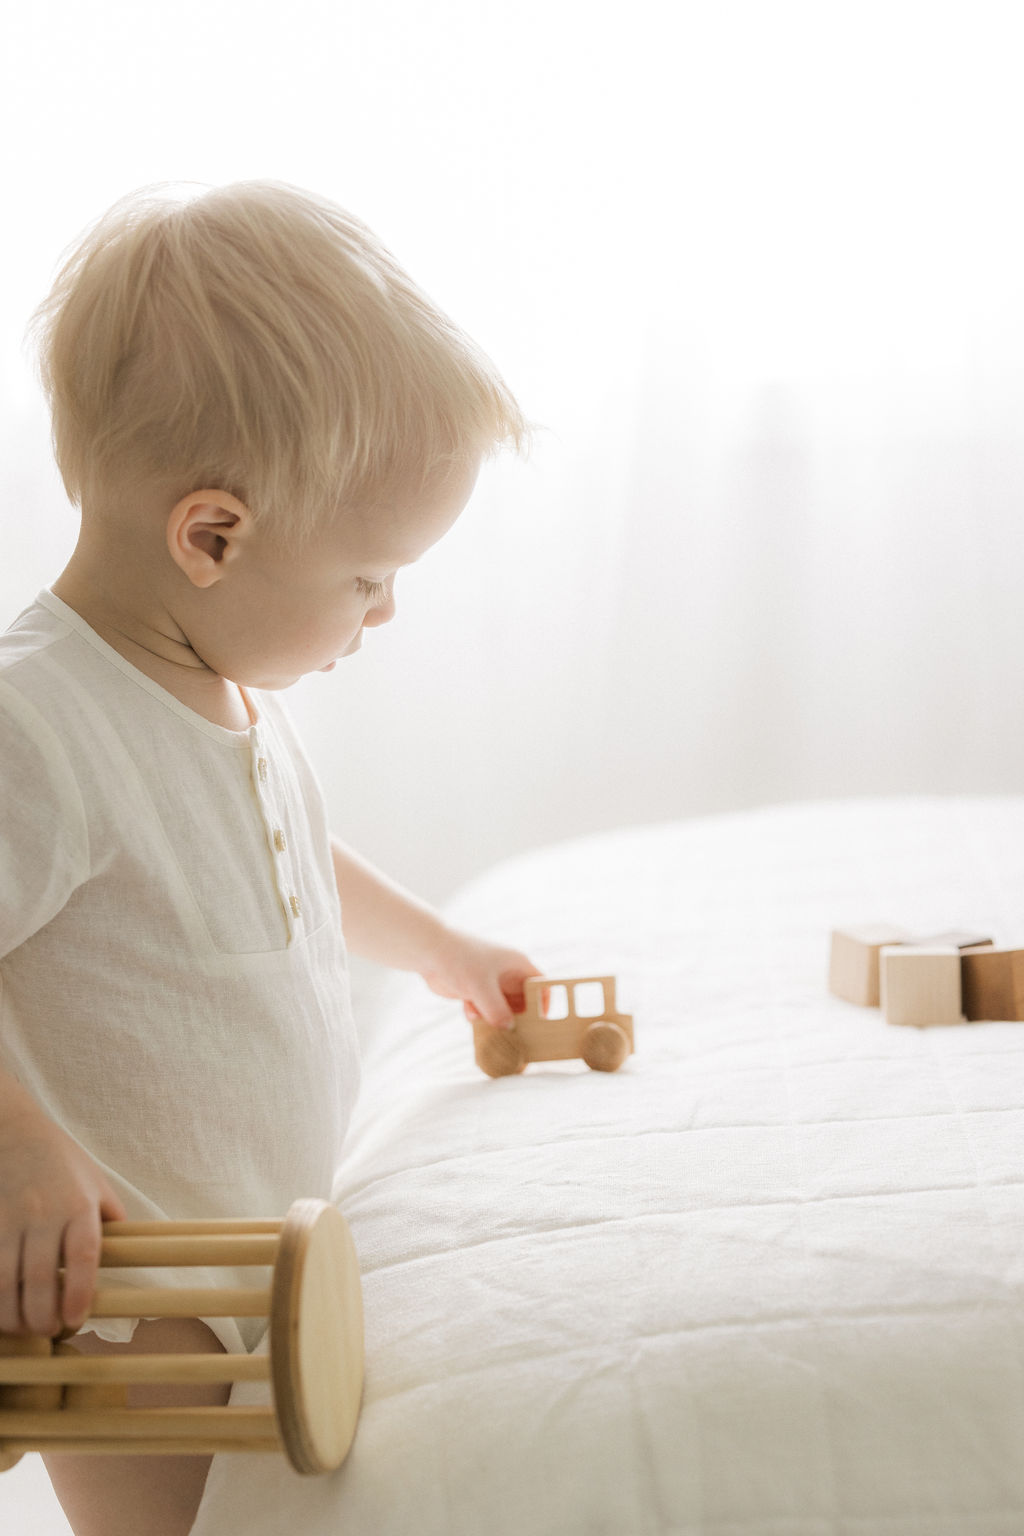 A toddler boy in a white onesie plays with wooden toys on a white bed little ones livingston